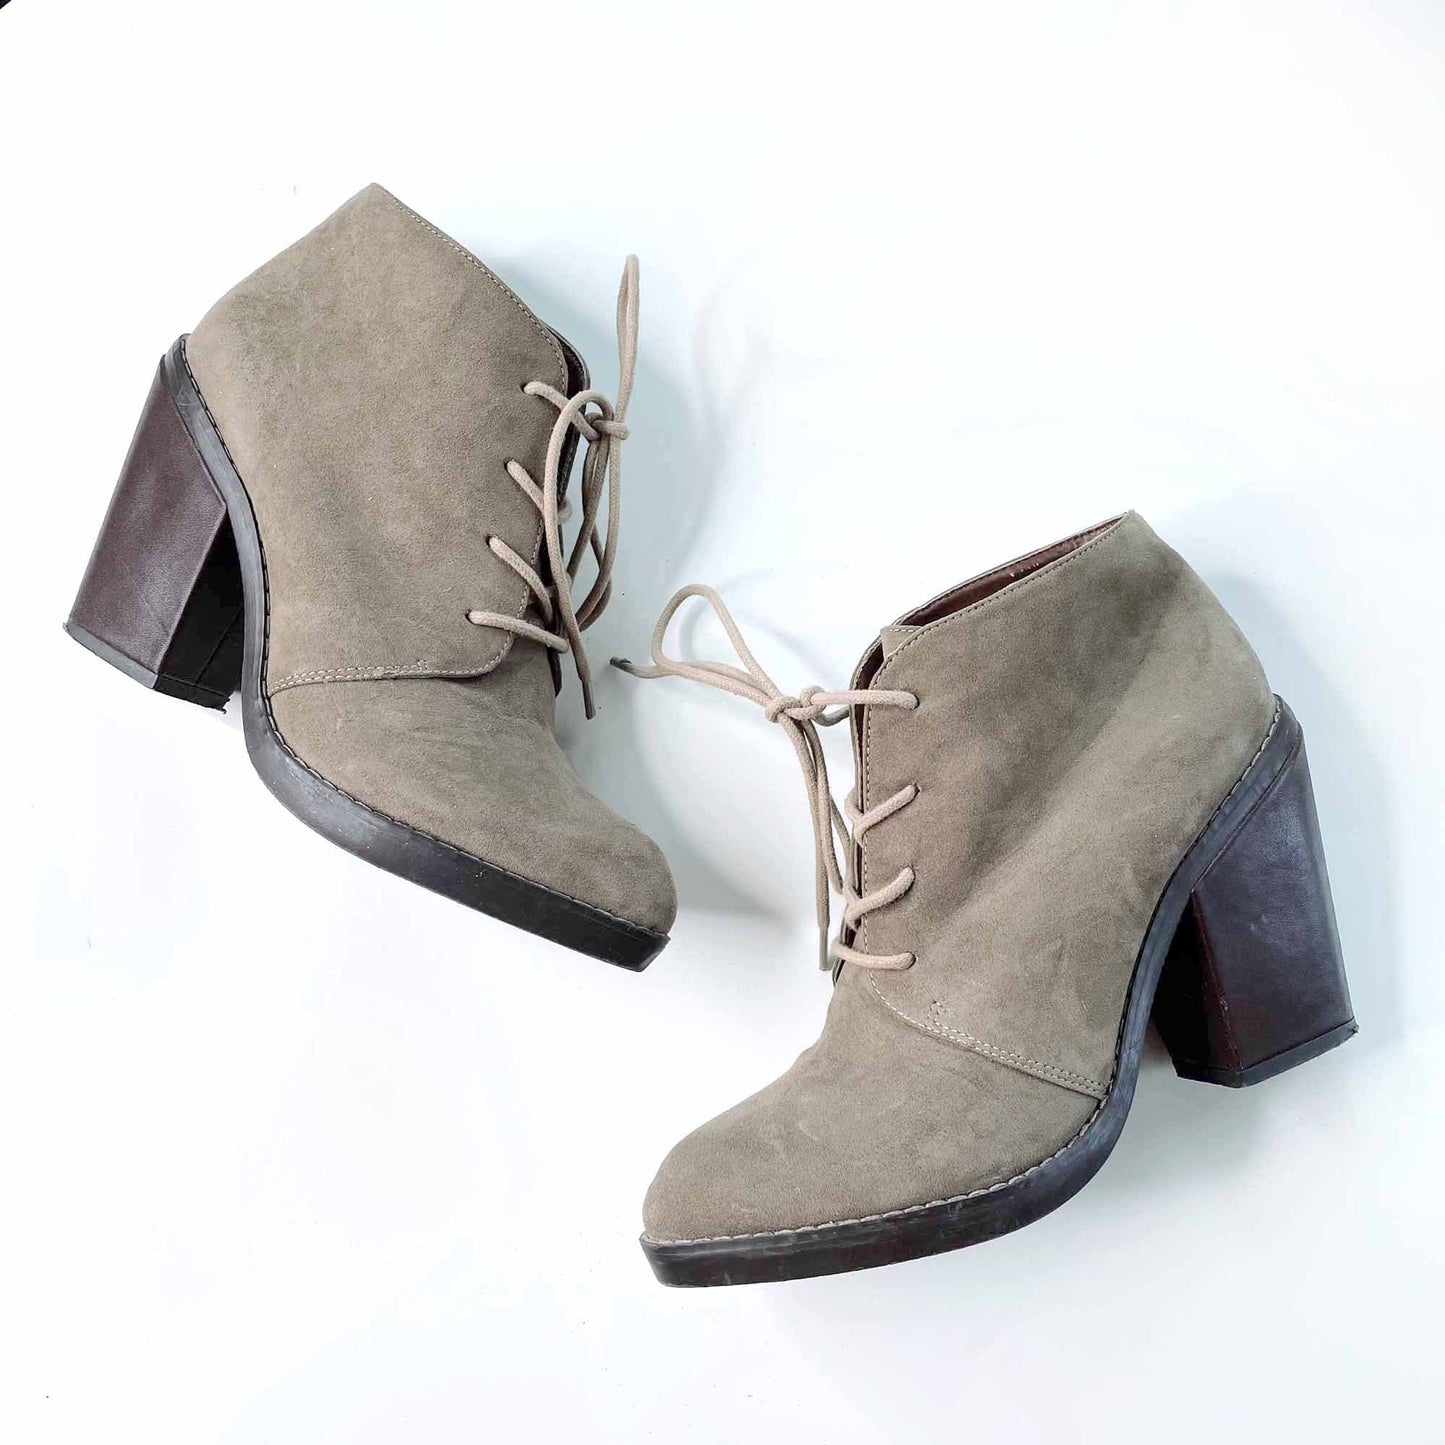 steve madden jaysoni vegan suede lace-up ankle boot - size 8